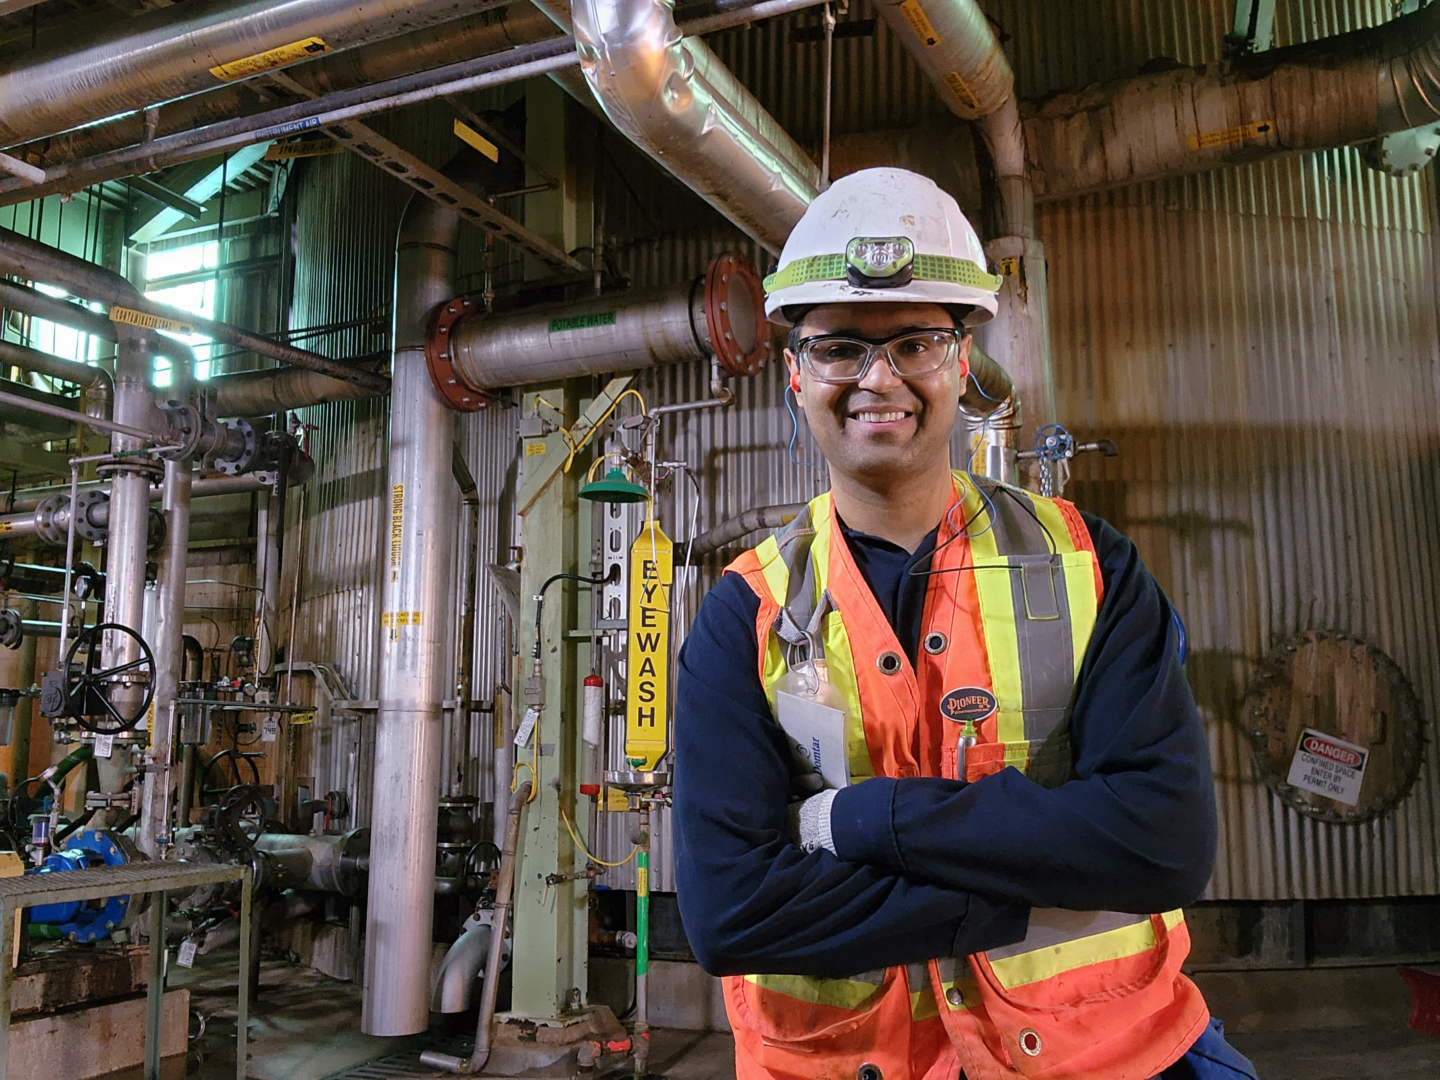 Bilal Junaidi, a process engineer at Domtar's Dryden Mill, was named to Pulp & Paper Canada's Top 10 Under 40 for 2022.